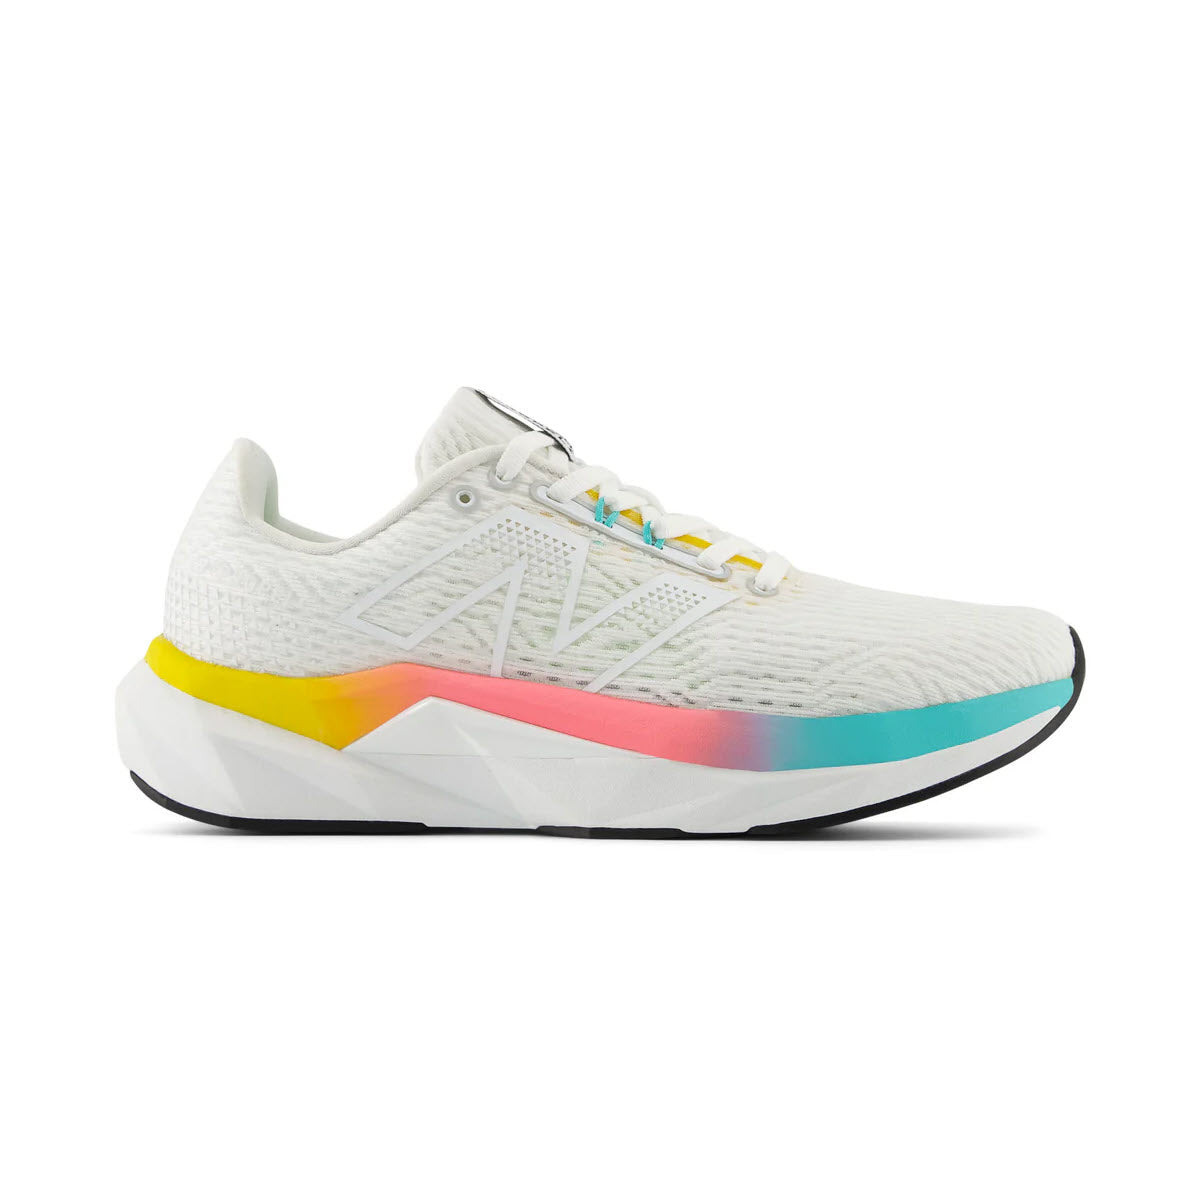 The New Balance Propel V5 White/Cyber Jade/Ginger Lemon women's running shoe features a textured white upper, a multicolored gradient midsole in shades of yellow, pink, and teal made from bio-based content, and a black outsole.